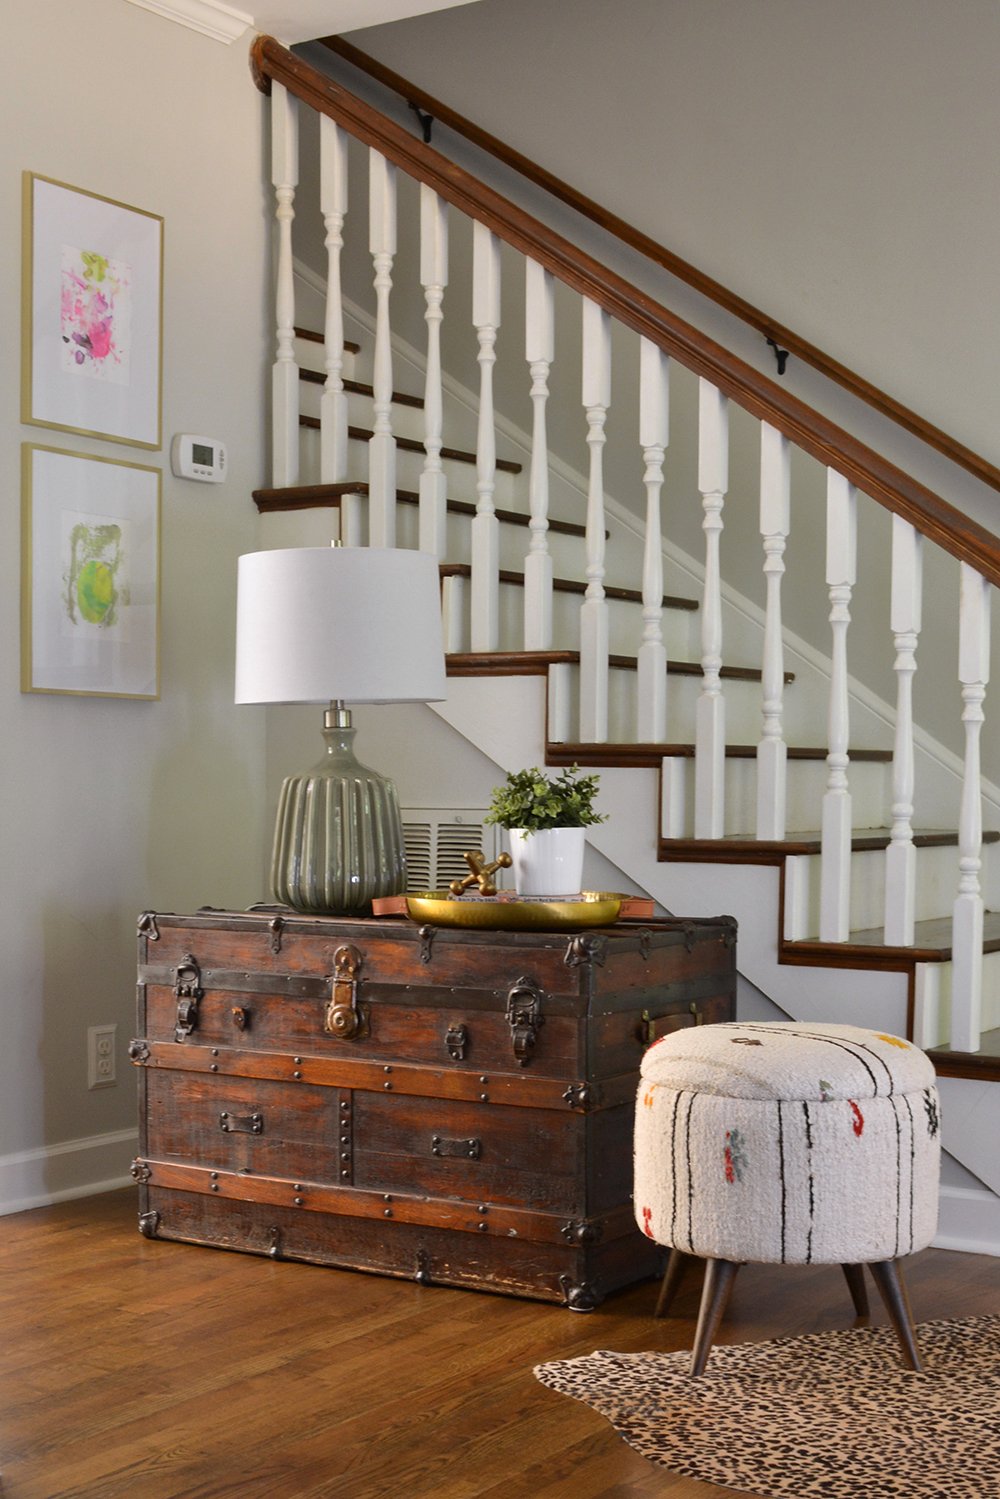 Sherwin Williams Agreeable Gray is a perfect neutral for entryways and stairwells. Designed by Lesley Myrick Interior Design.